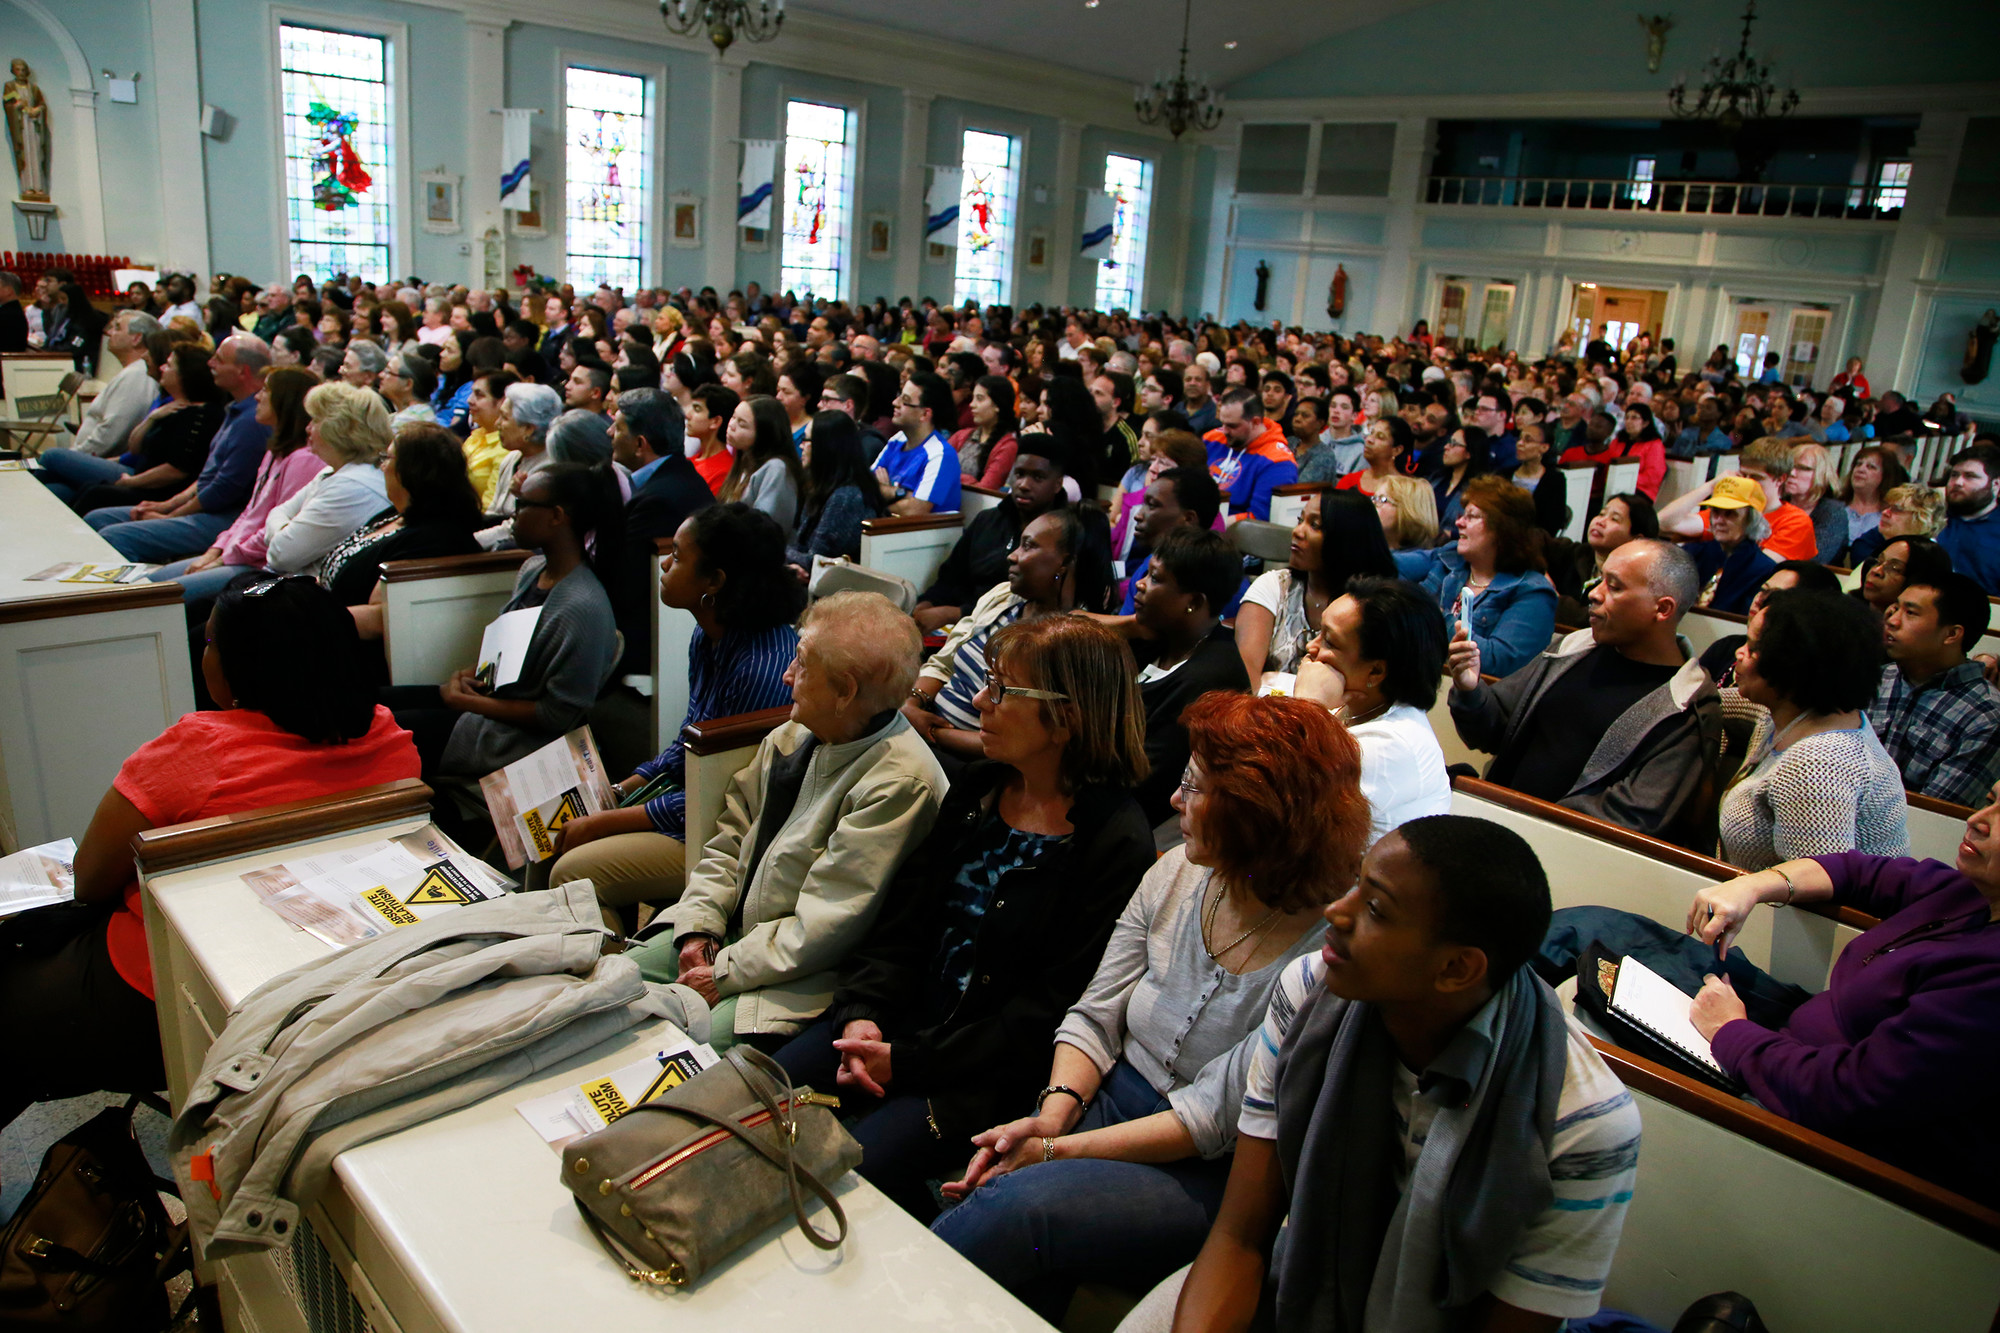 It was A packed house at Church of the Blessed Sacrament during the event on April 19.